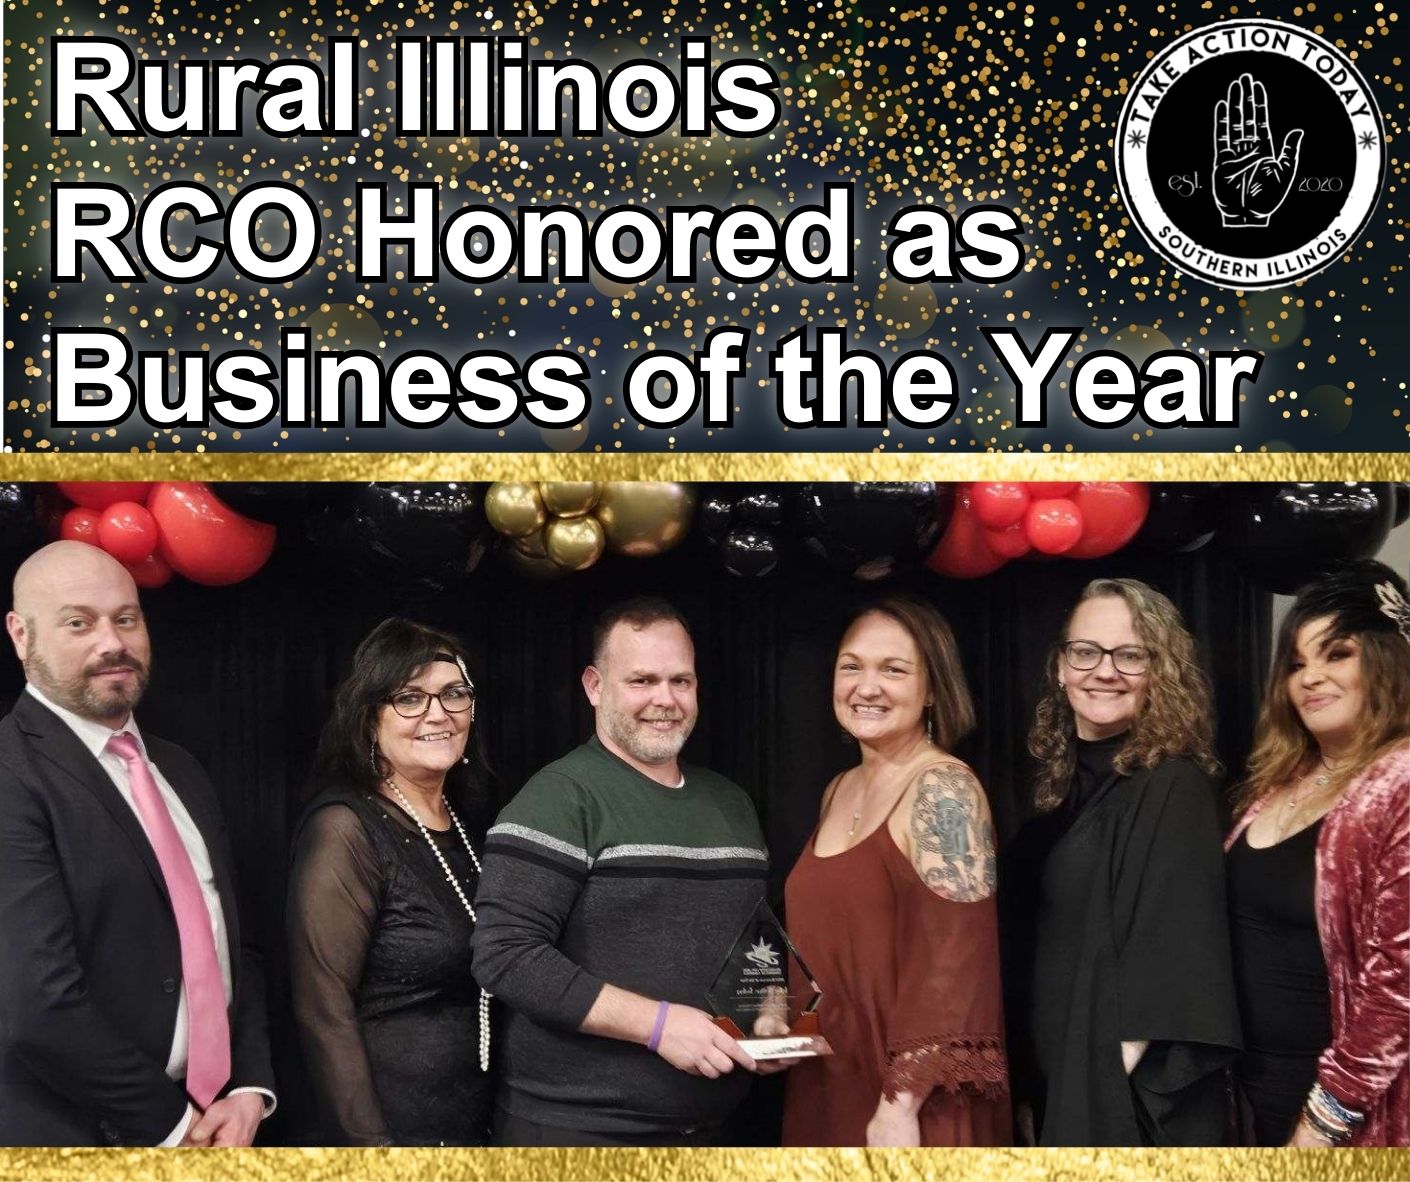 Rural Illinois RCO named business of the year